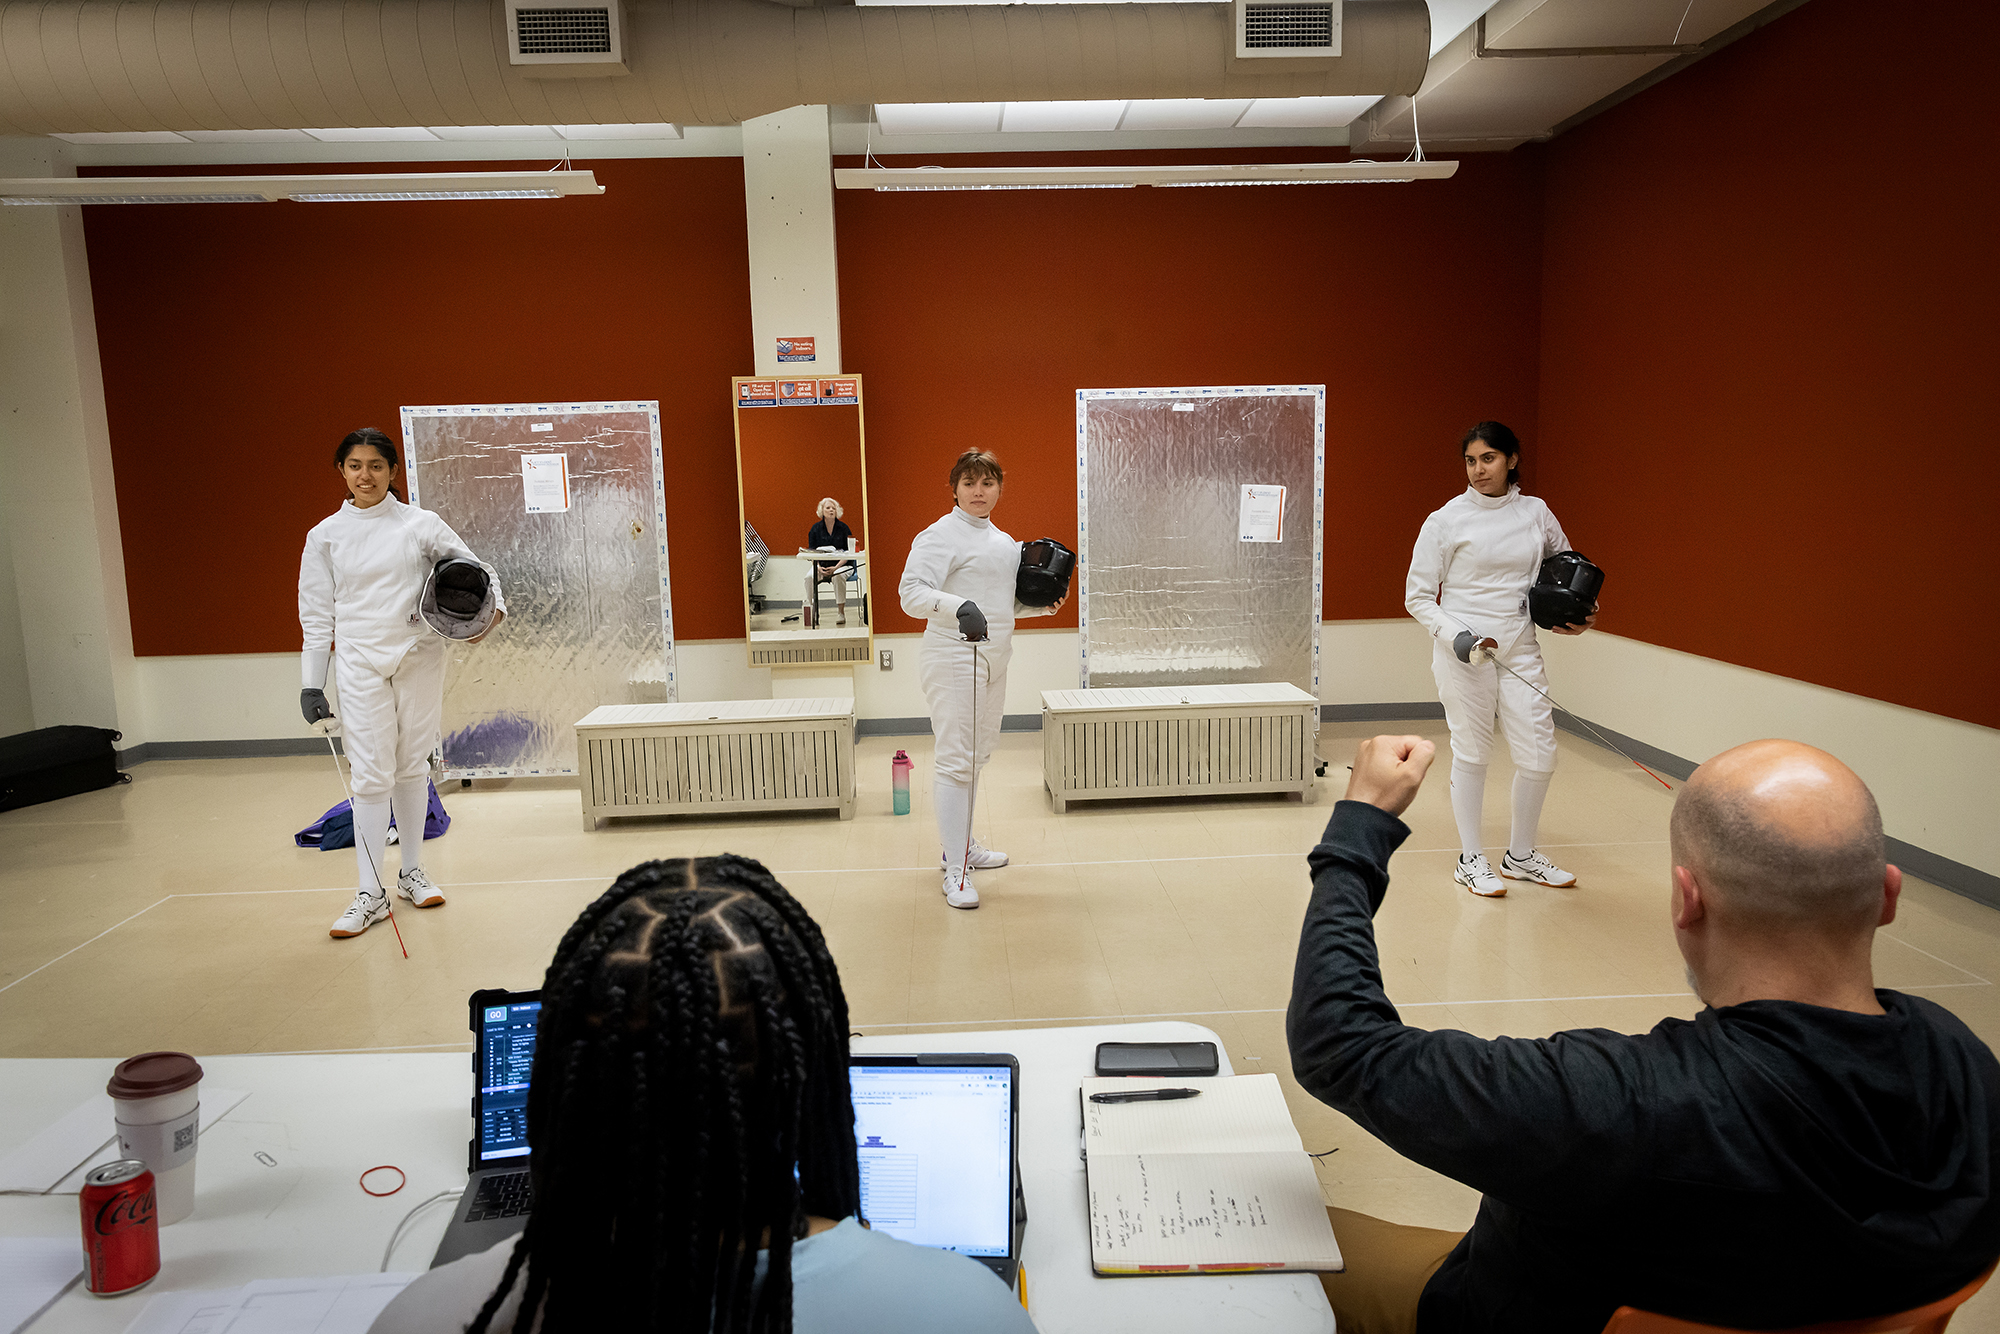 Three actors in fencing gear are directed during play rehearsal.